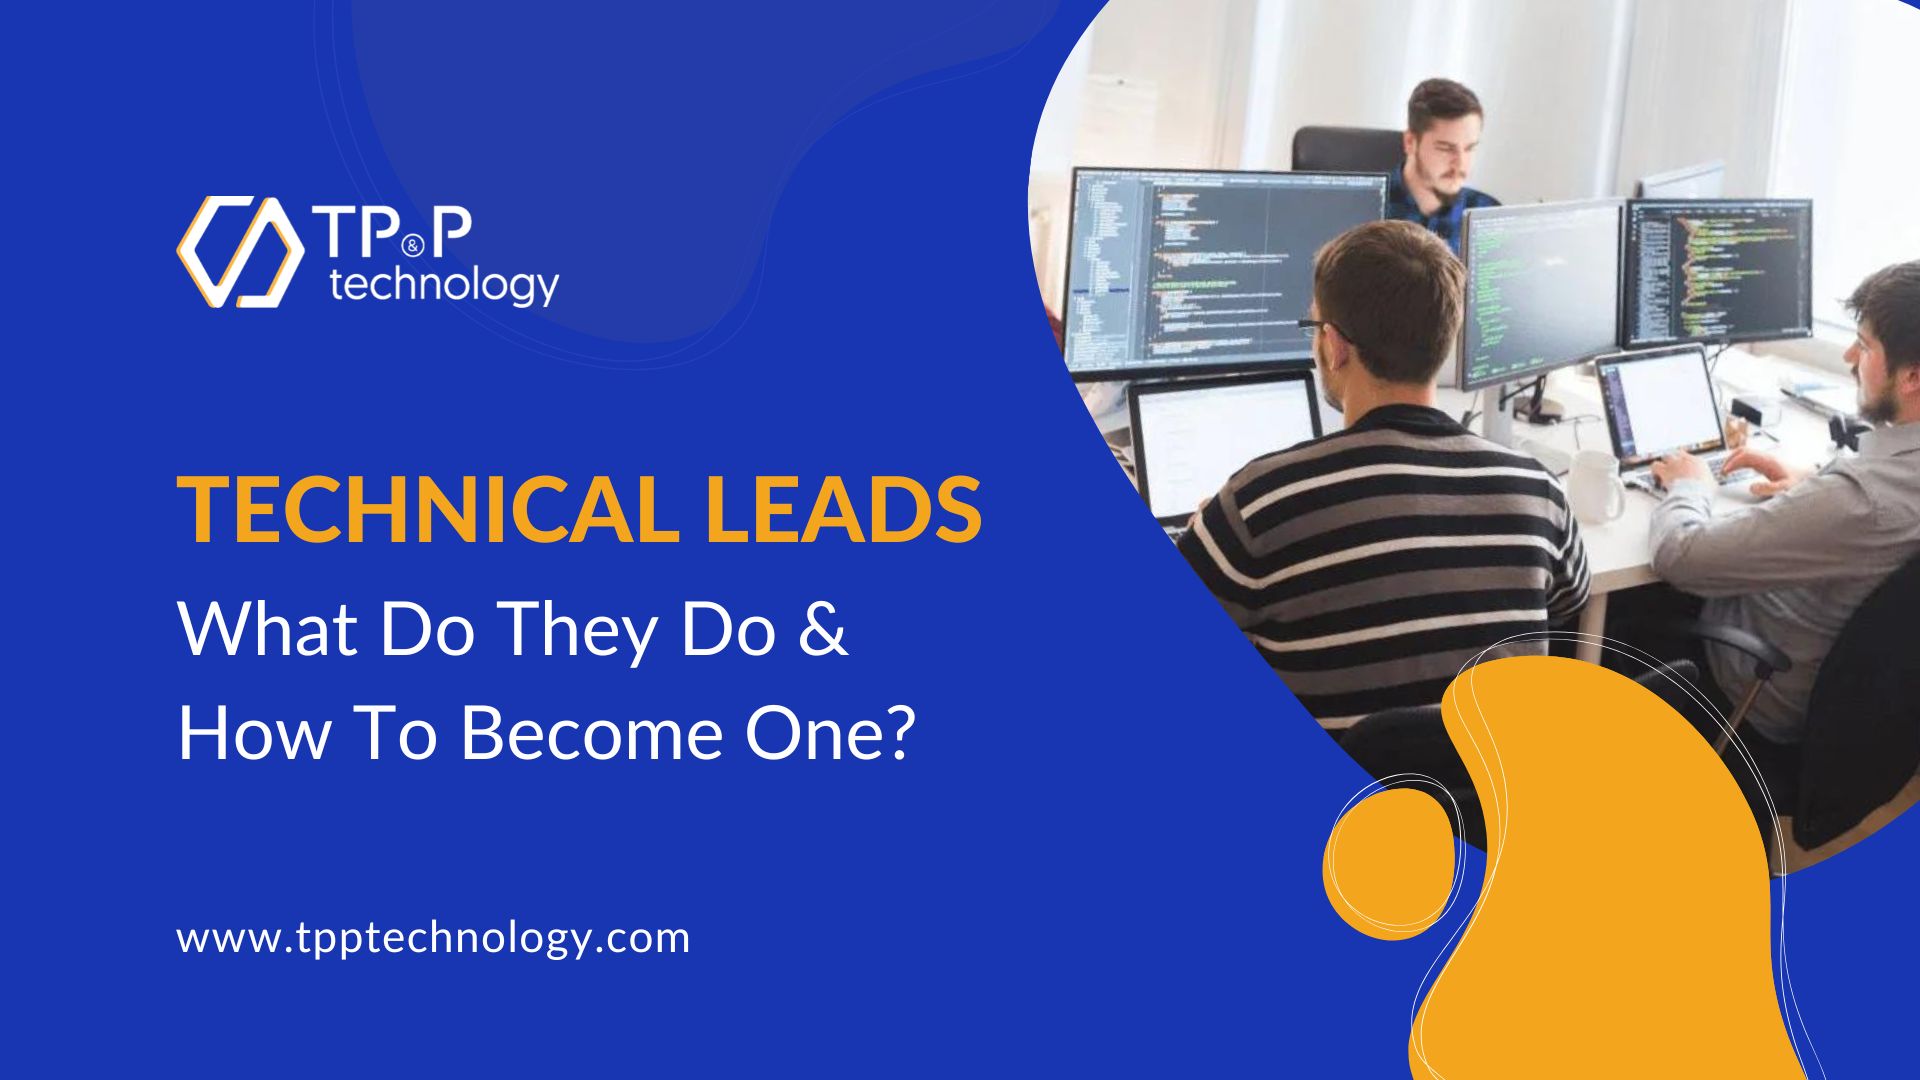 Technical Leads: What Do They Do & How To Become One?